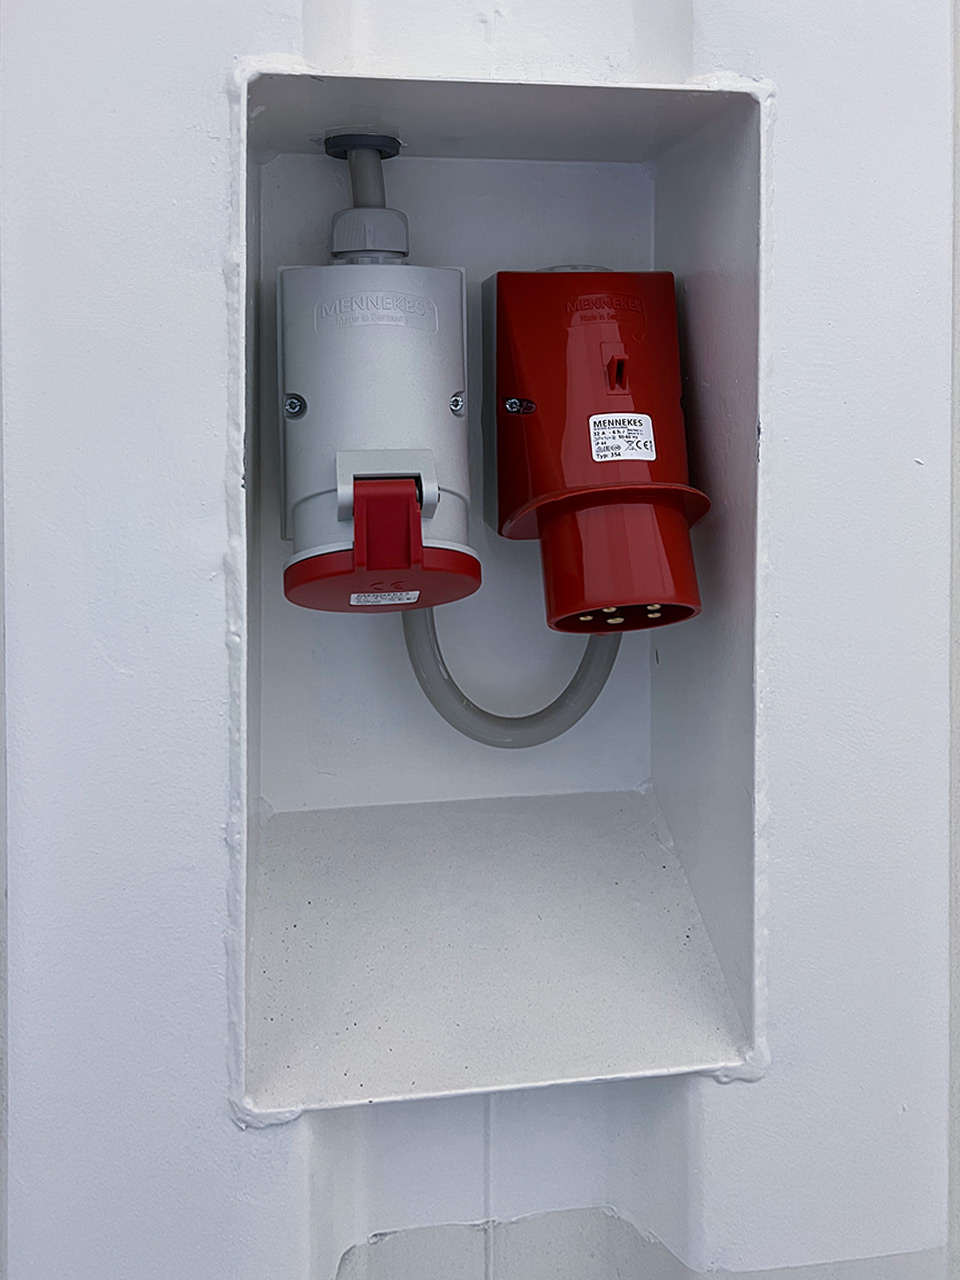 Container main supply connection: Power inlet